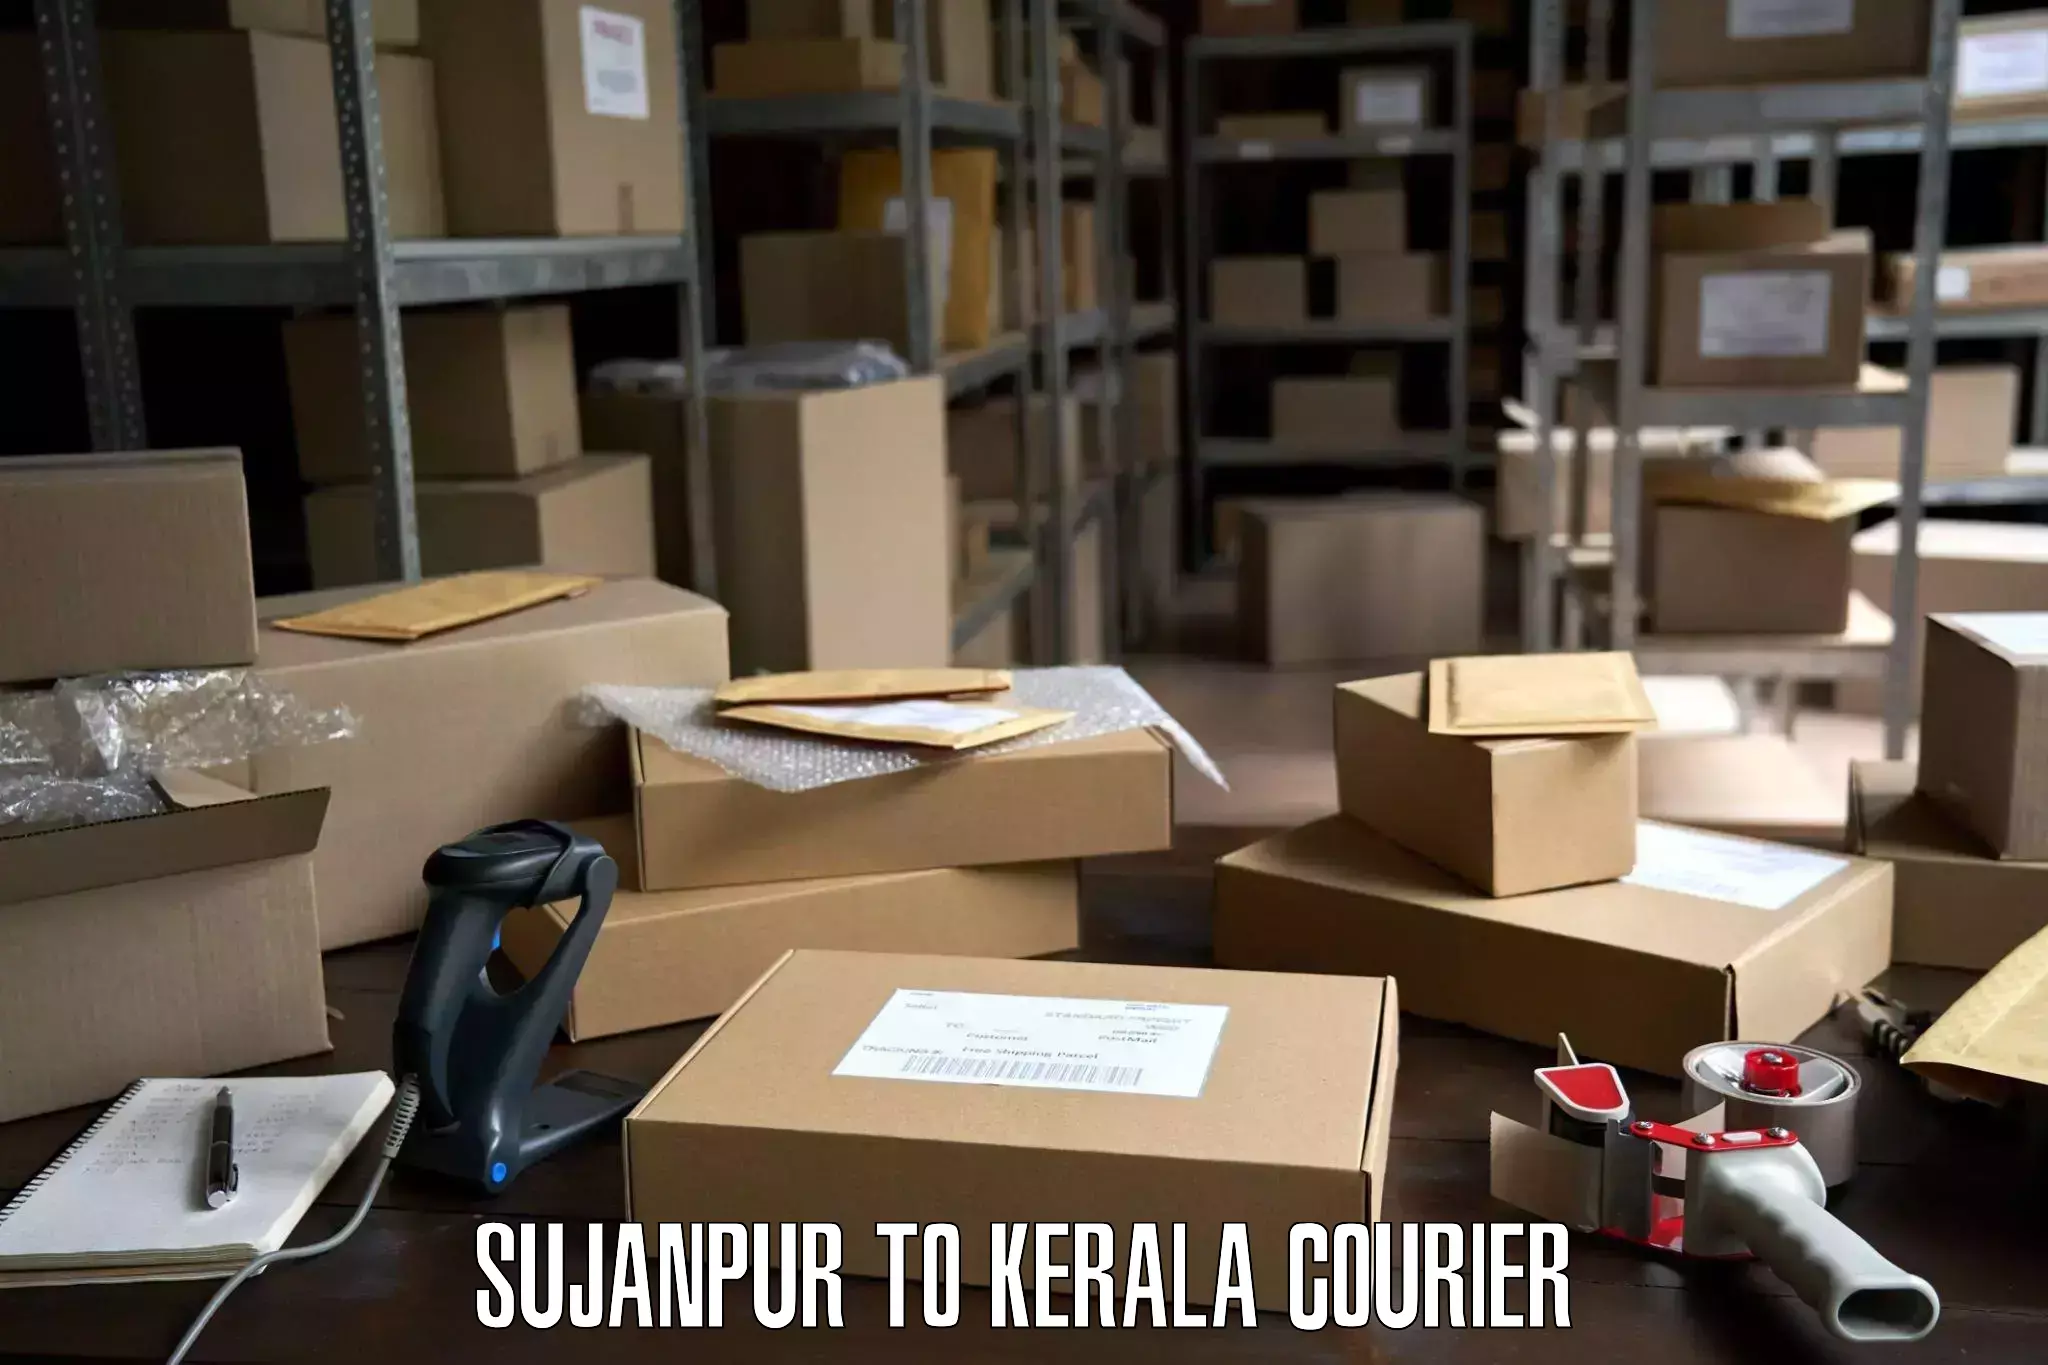 Furniture delivery service Sujanpur to Kochi